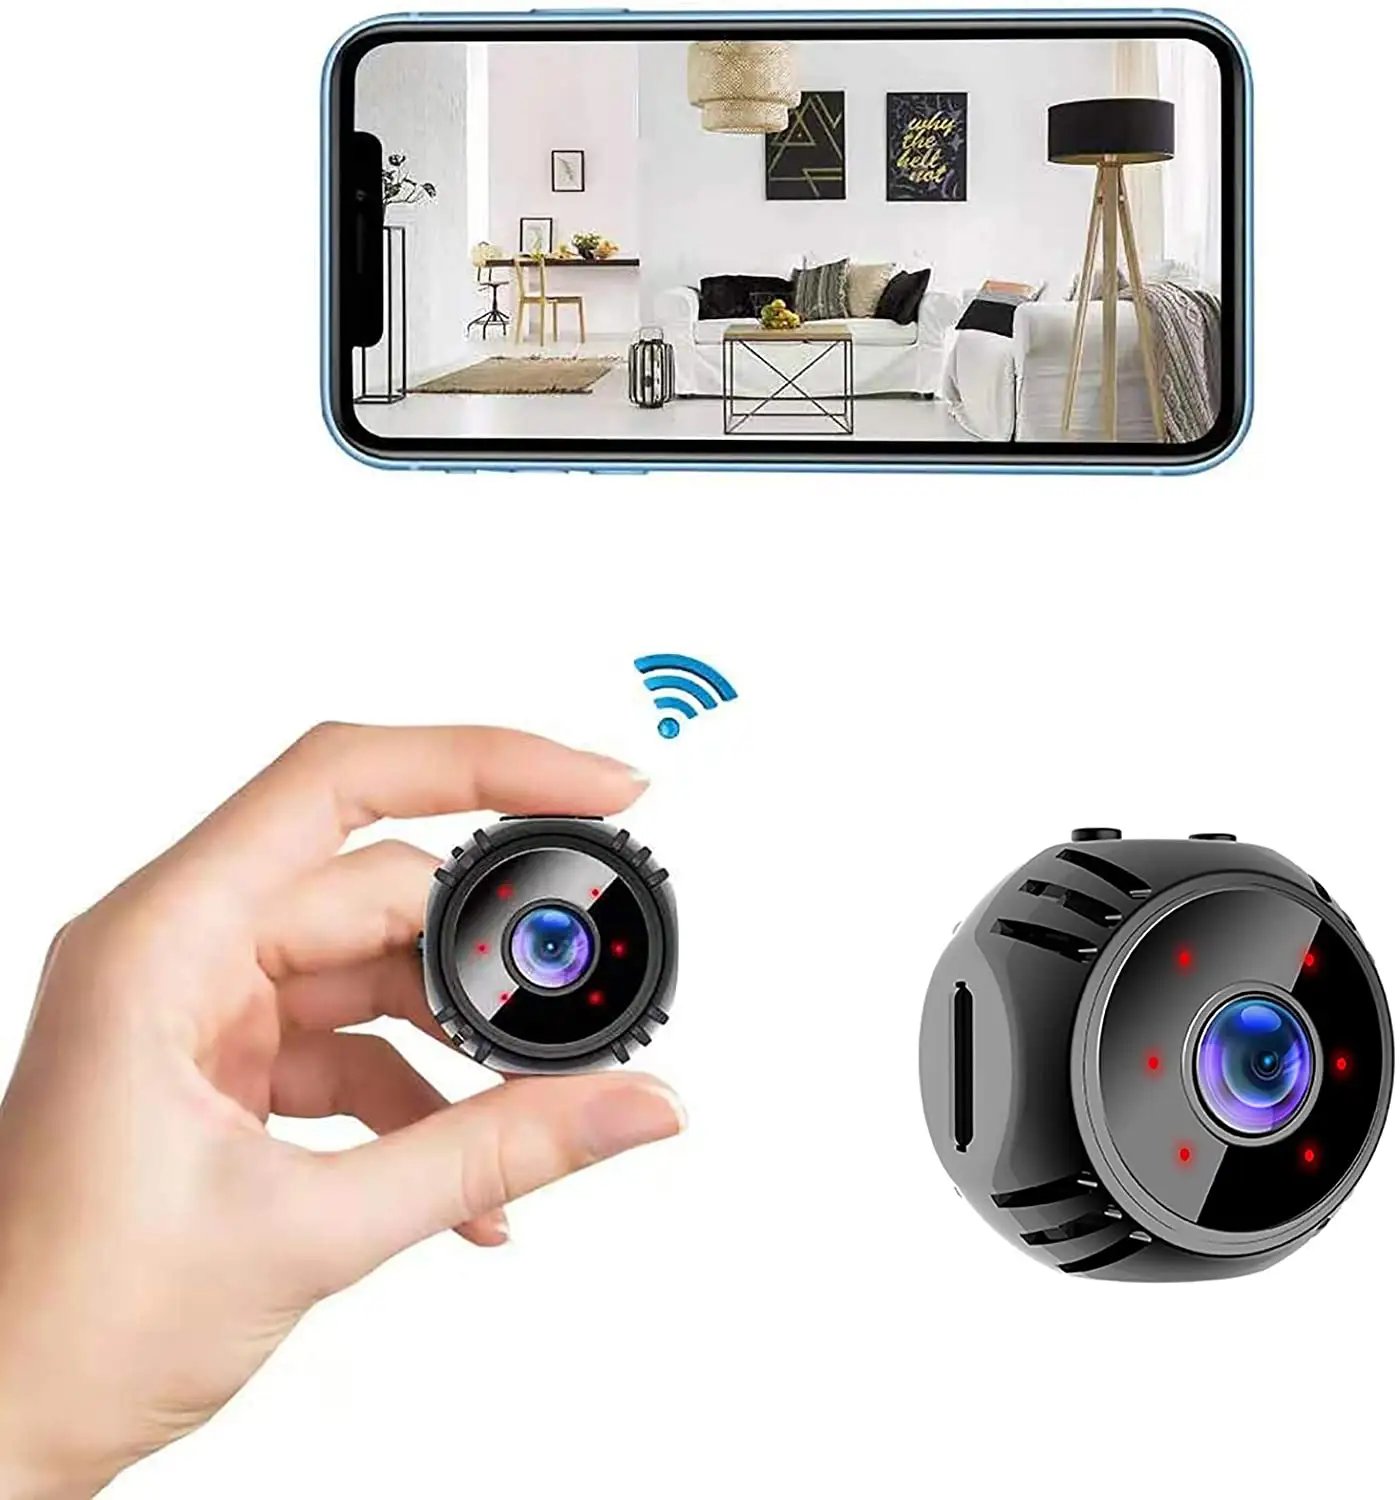 Mini WiFi Camera Wireless Security Surveillance Cameras Micro Nanny Cam with Phone App Live Feed, Night Vision, Motion Detection